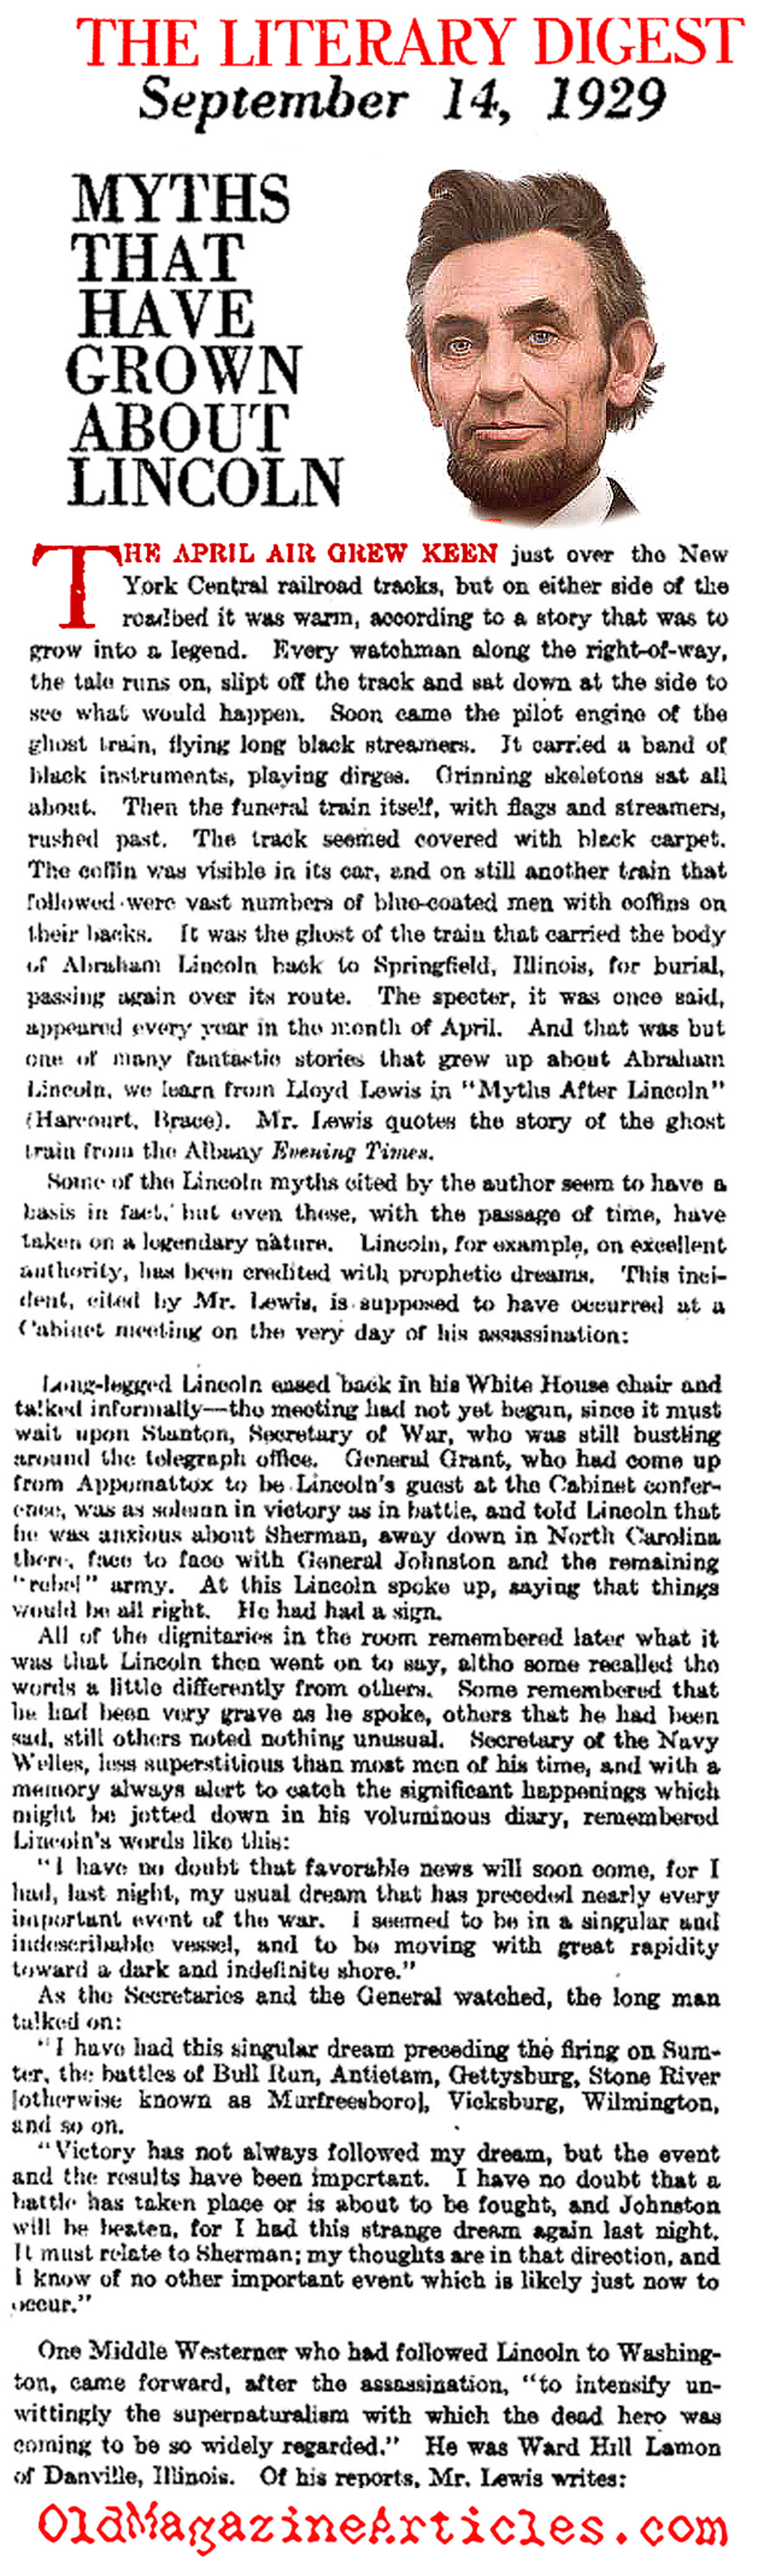 Myths About Lincoln (Literary Digest, 1929)